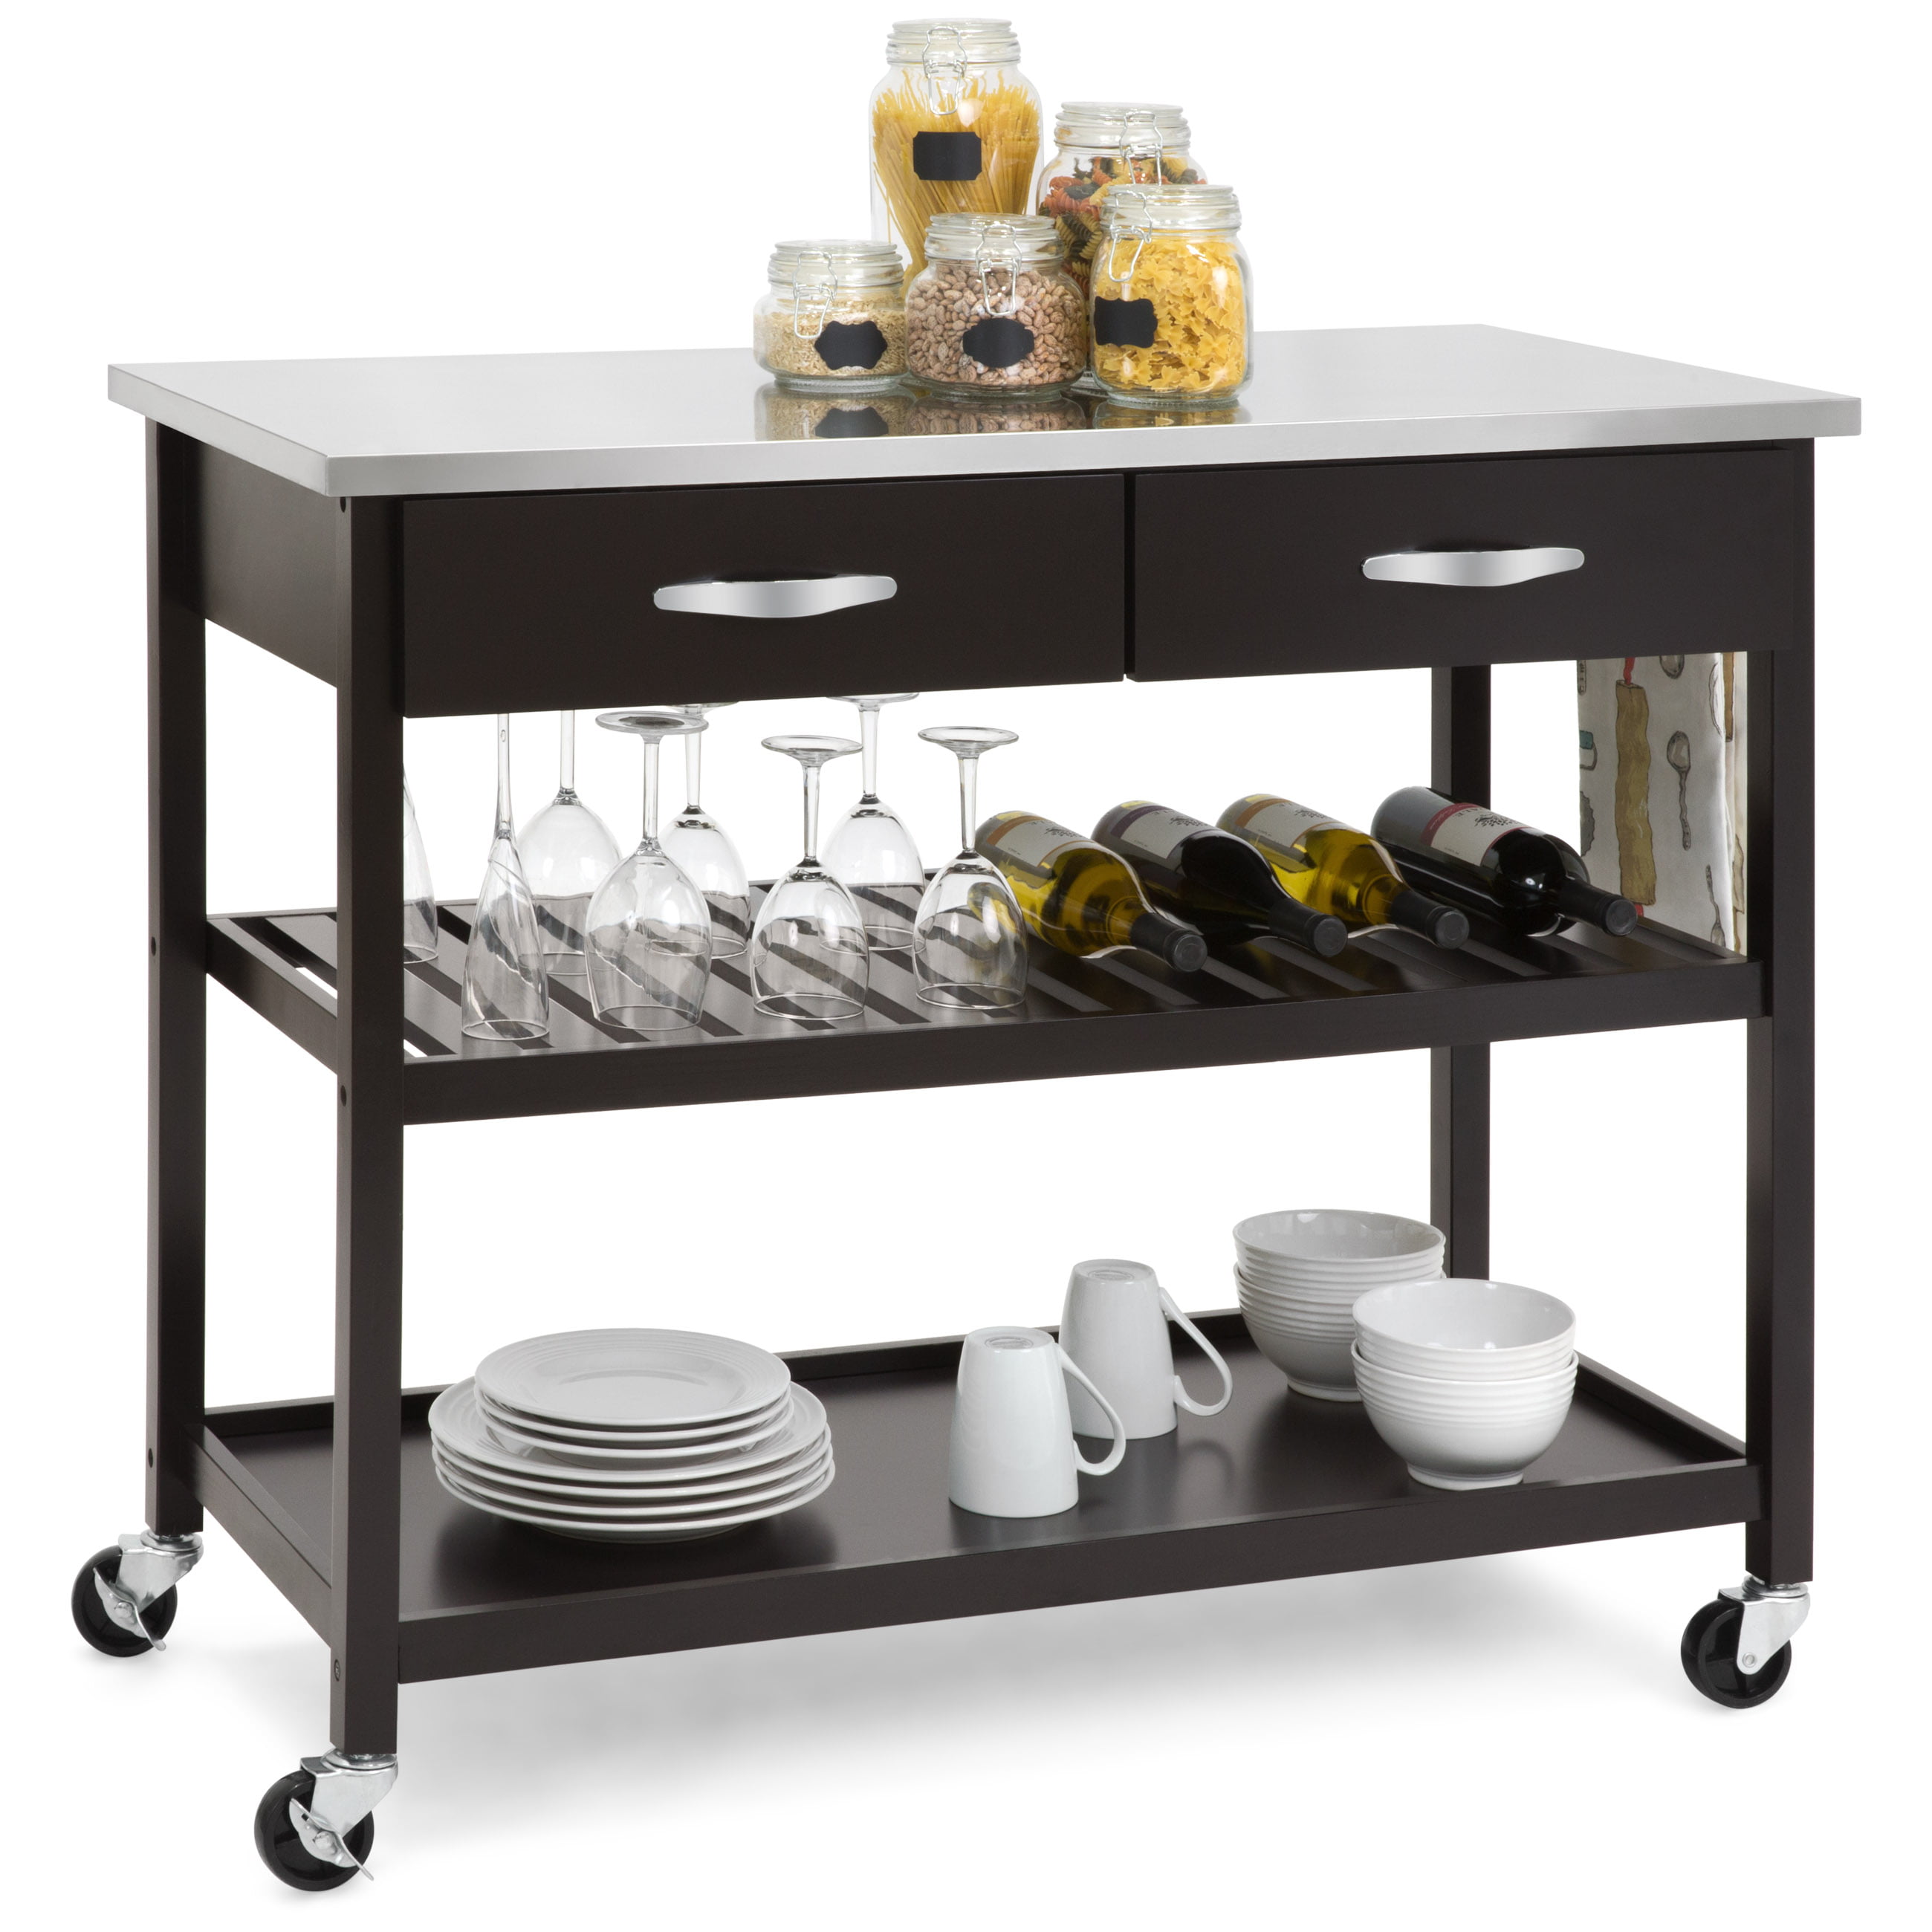 Best Choice Products Mobile Kitchen Island Utility Cart W Stainless Steel Countertop